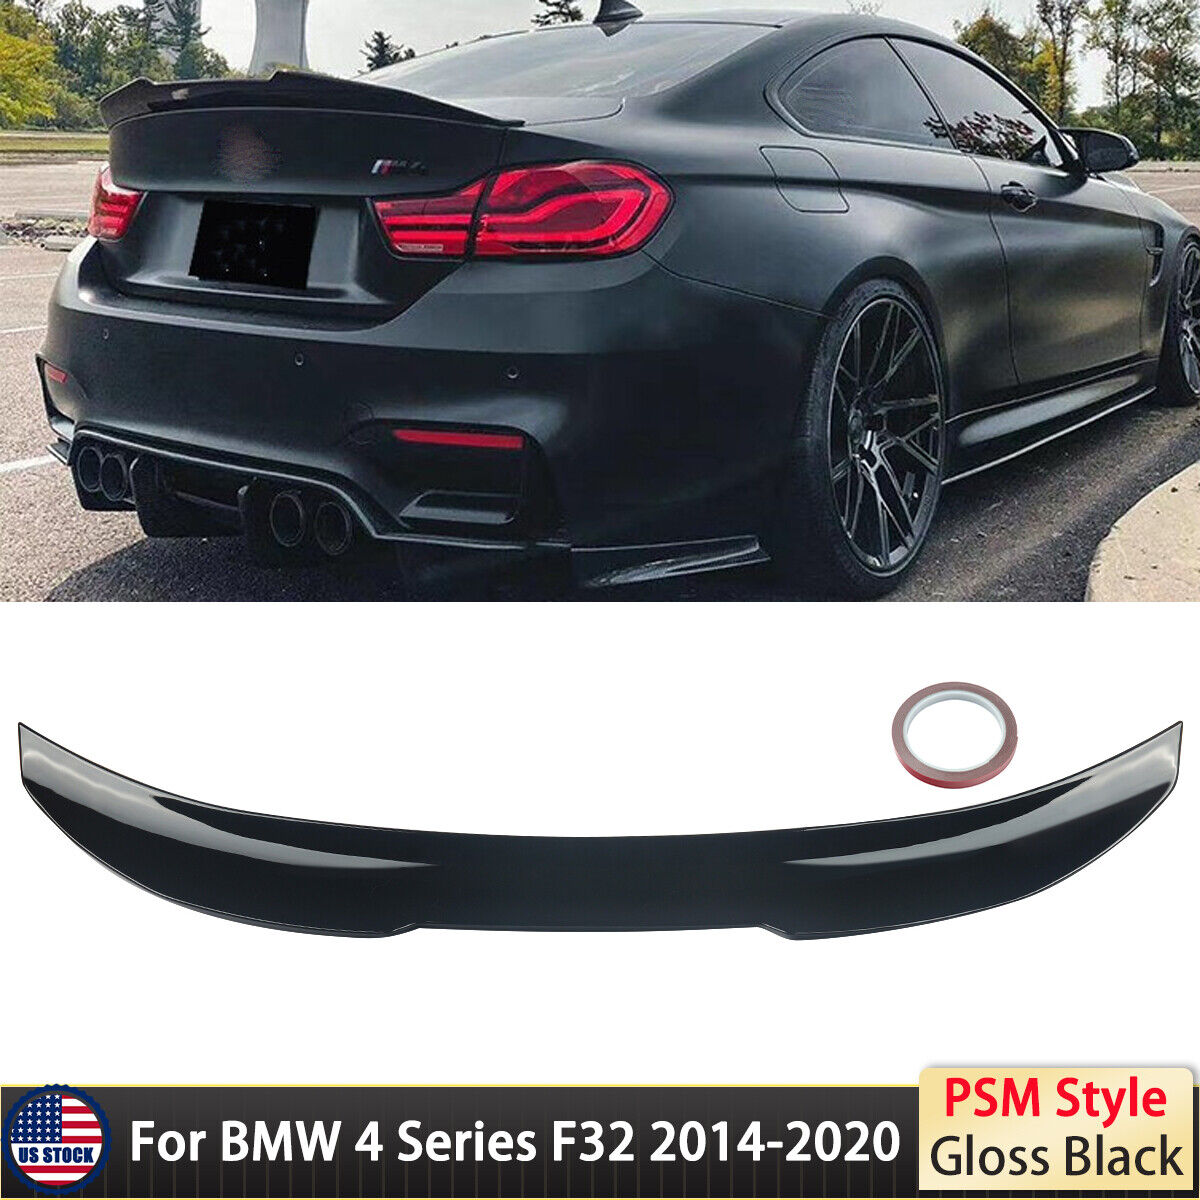 For BMW 4 Series F32 428i 430i 435i 440i PSM Style Gloss Black Rear Spoiler Wing